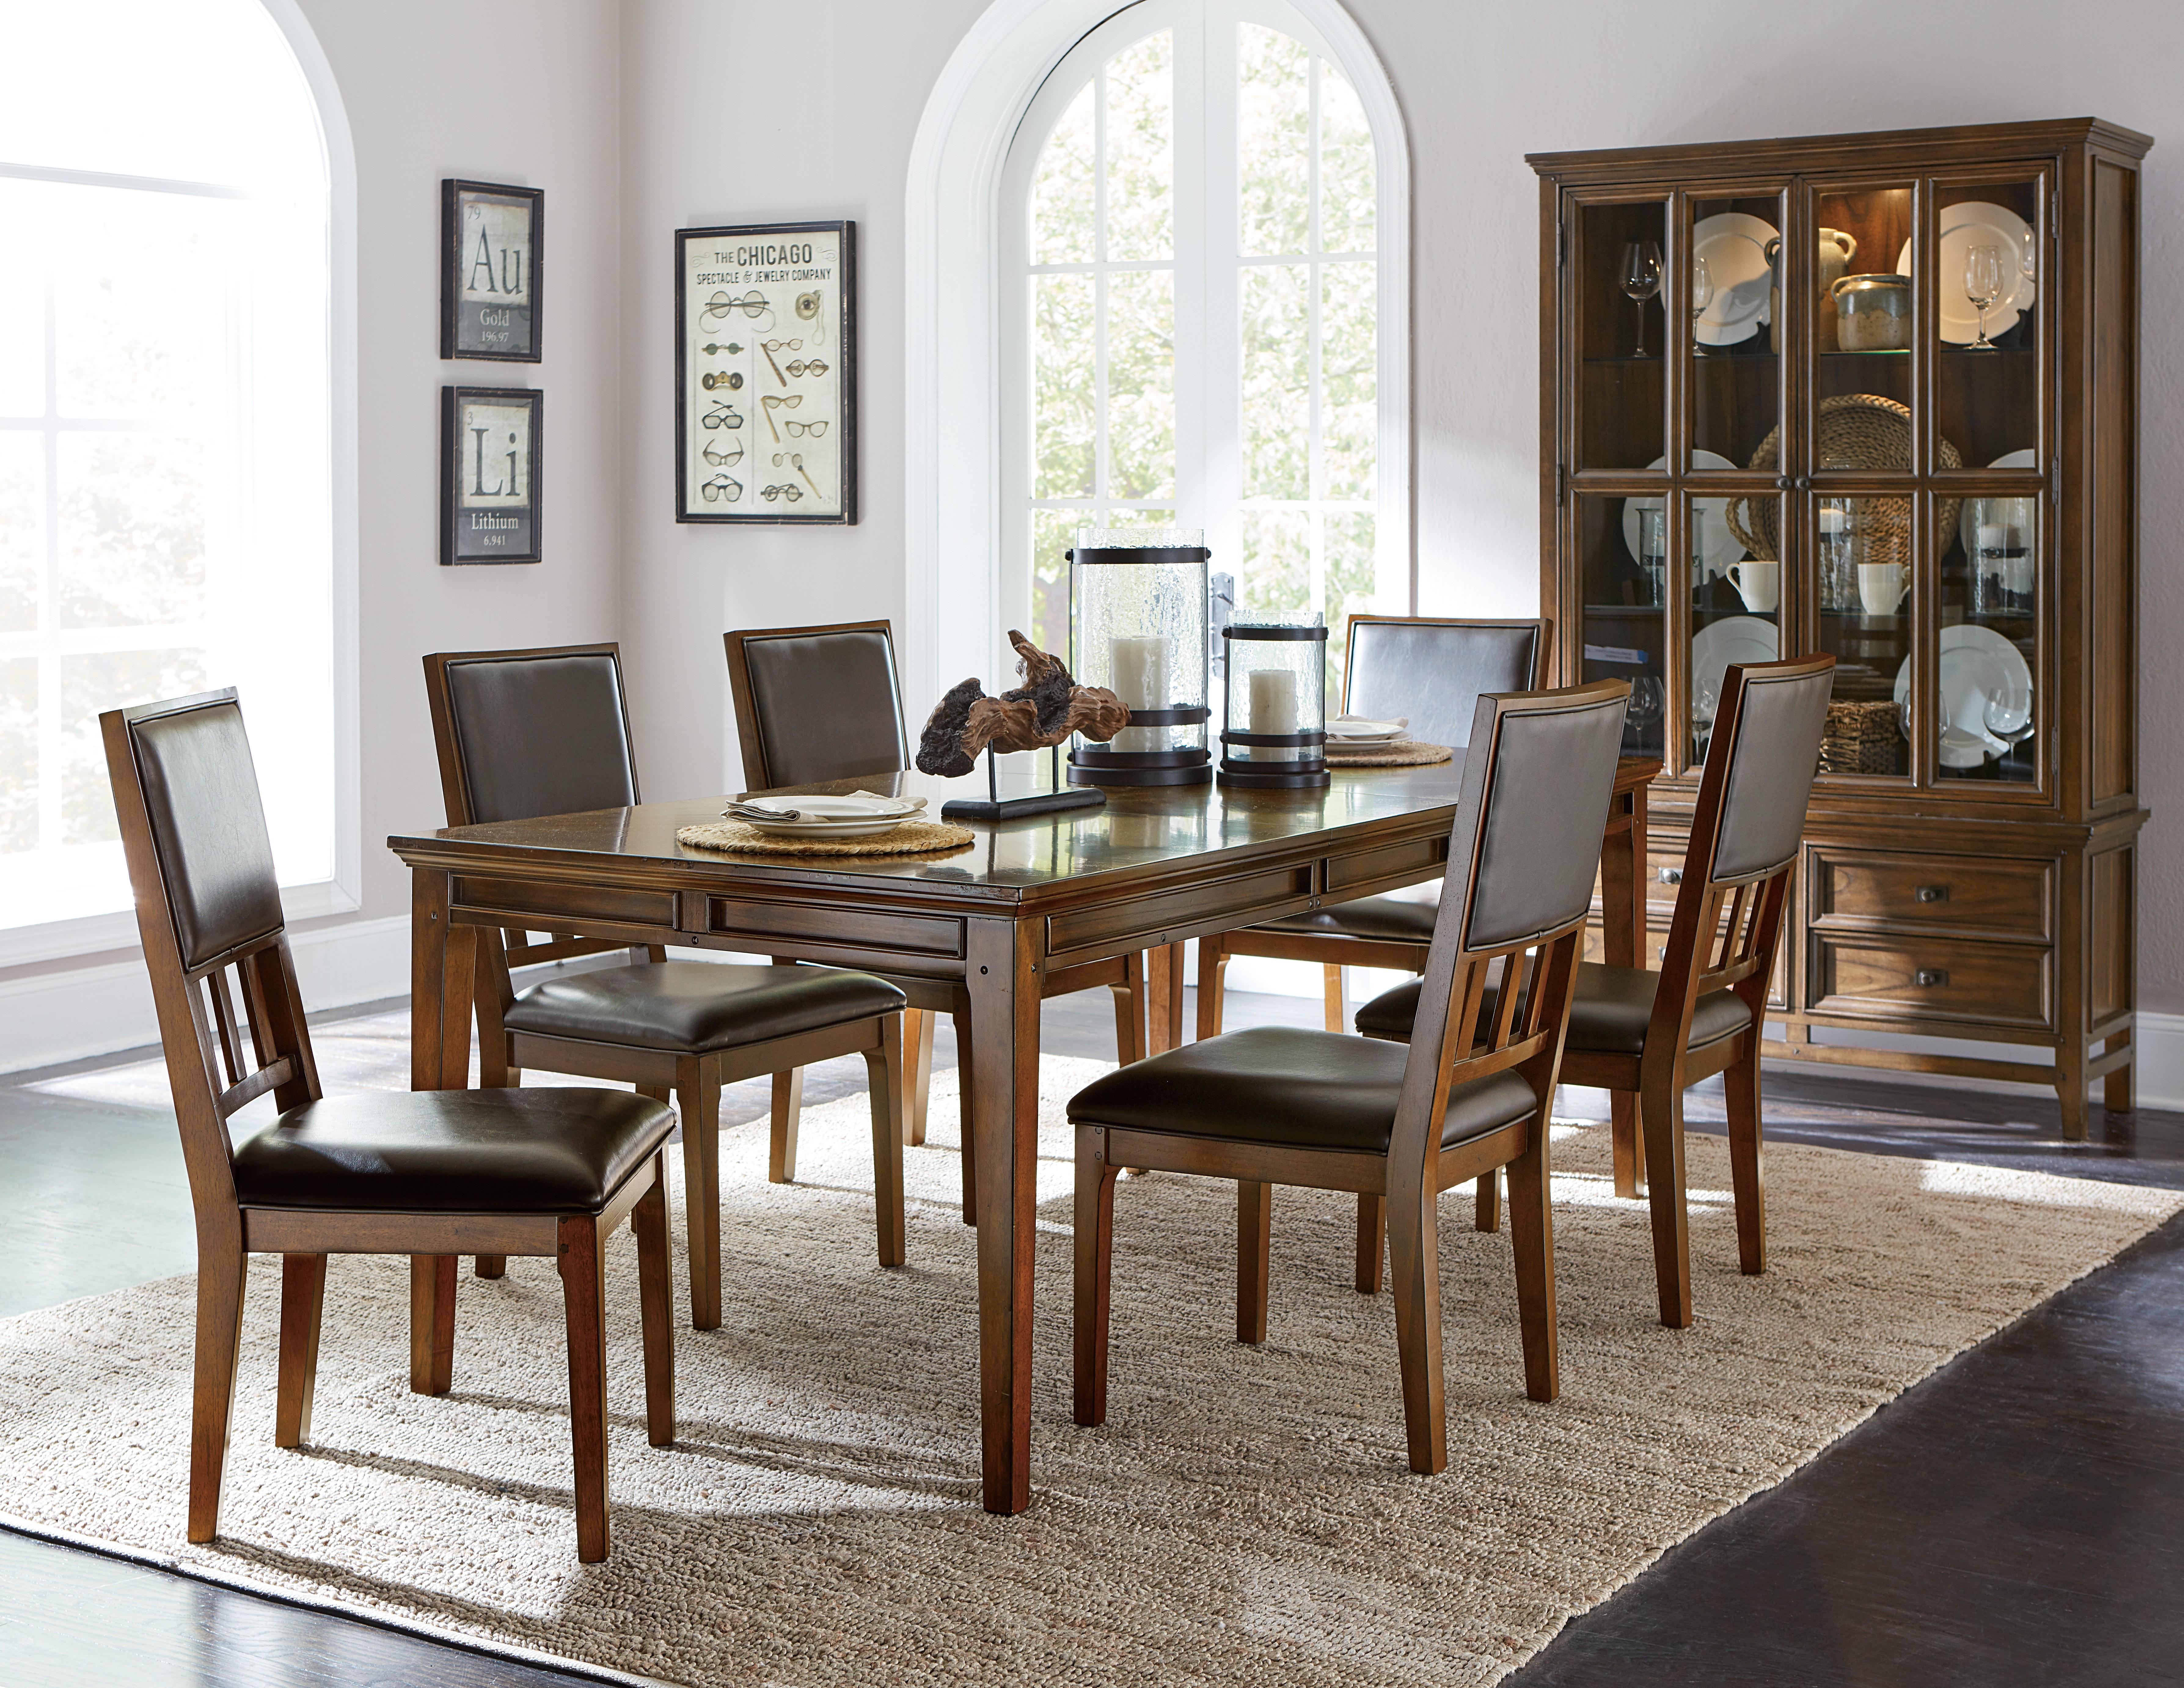 

    
Traditional Brown Cherry Wood Dining Room Set 7pcs Homelegance 1649-82* Frazier Park
